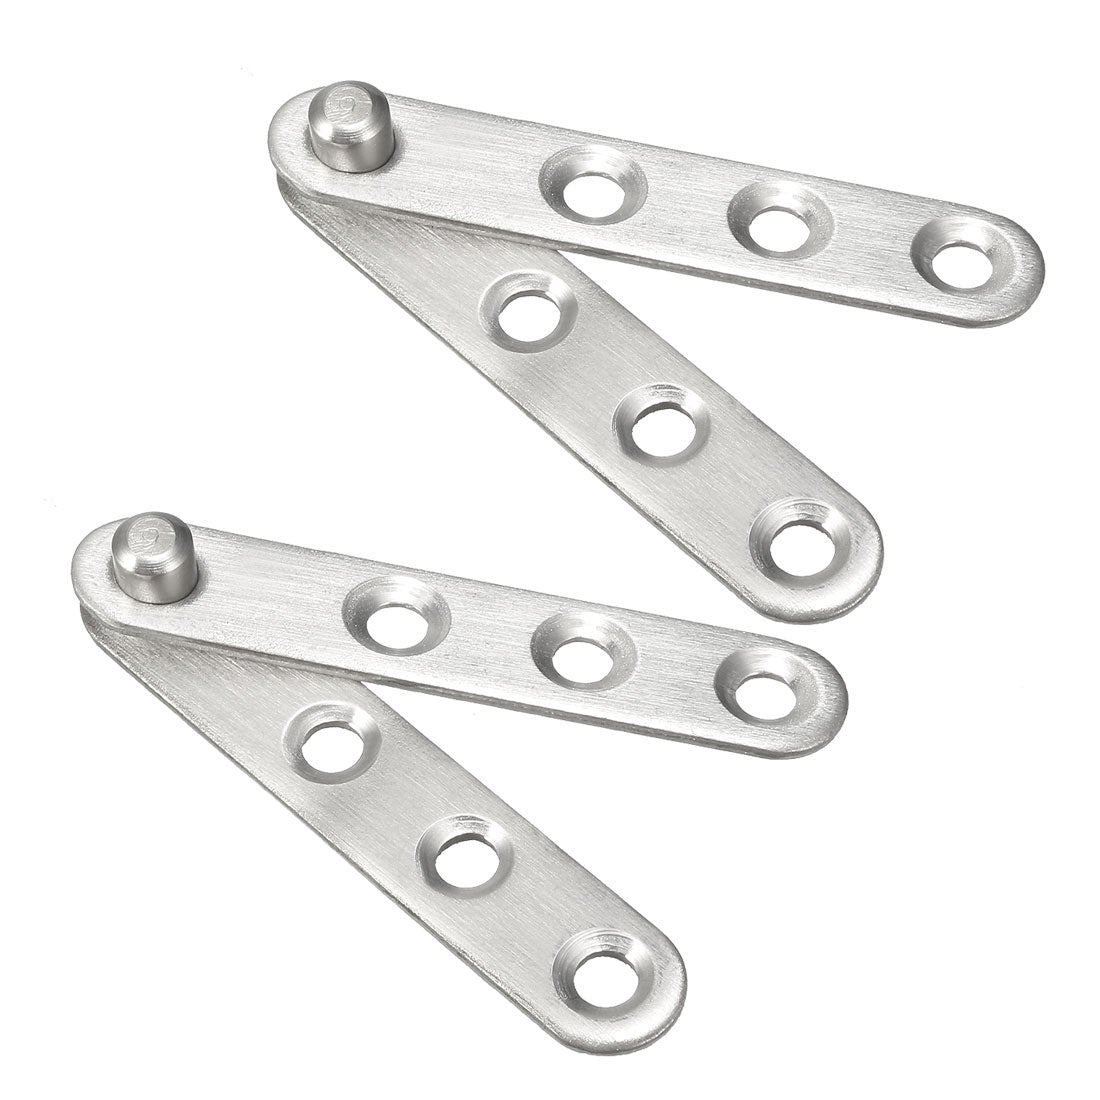 uxcell Uxcell 2 Sets Stainless Steel 360 Degree Rotating Door Pivot Hinge 60mm x 11mm